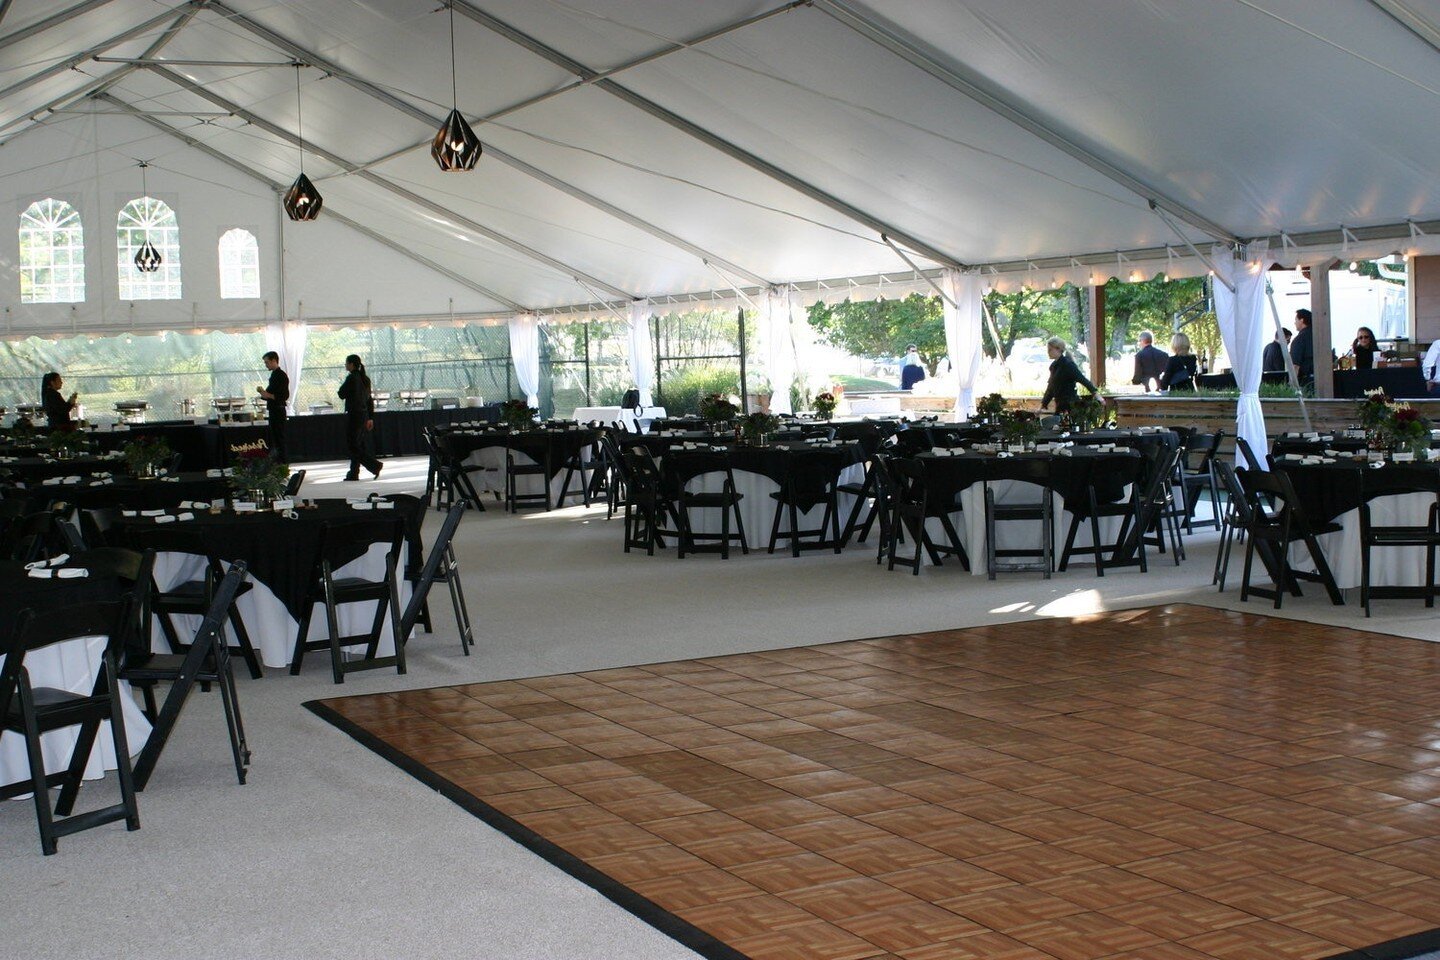 From tables and chairs to linens and utensils, Chief Rental has what you need to make your wedding reception unforgettable. Reserve online at www.chiefrental.com.
👇
#nashvillepartyrentals #nashvillerentals #partyrentals #tablerentals #tentrentals #b